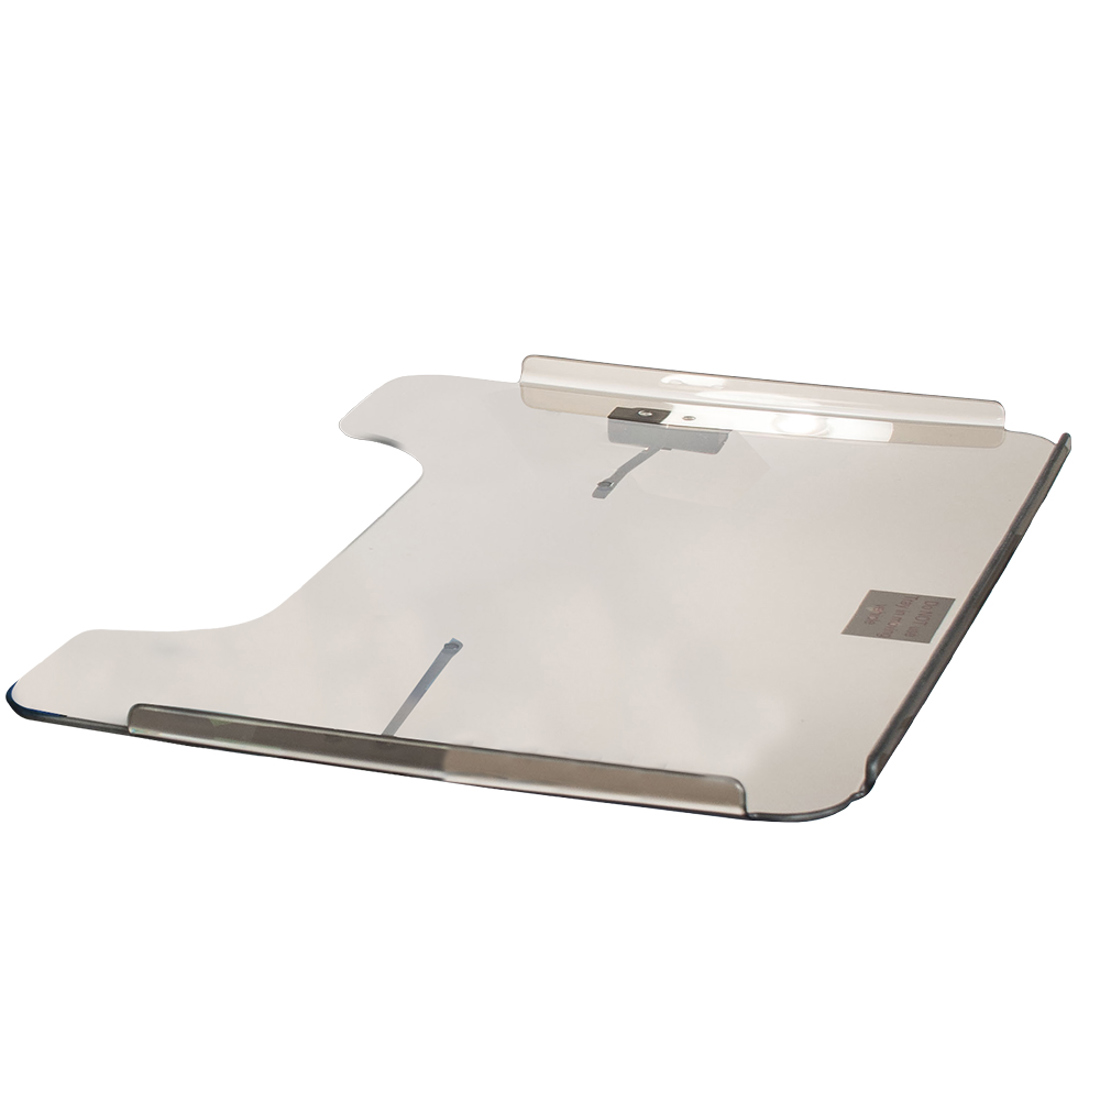 EZRider-Upper_Extremity_Support_Clear_Tray1000x1000.jpg